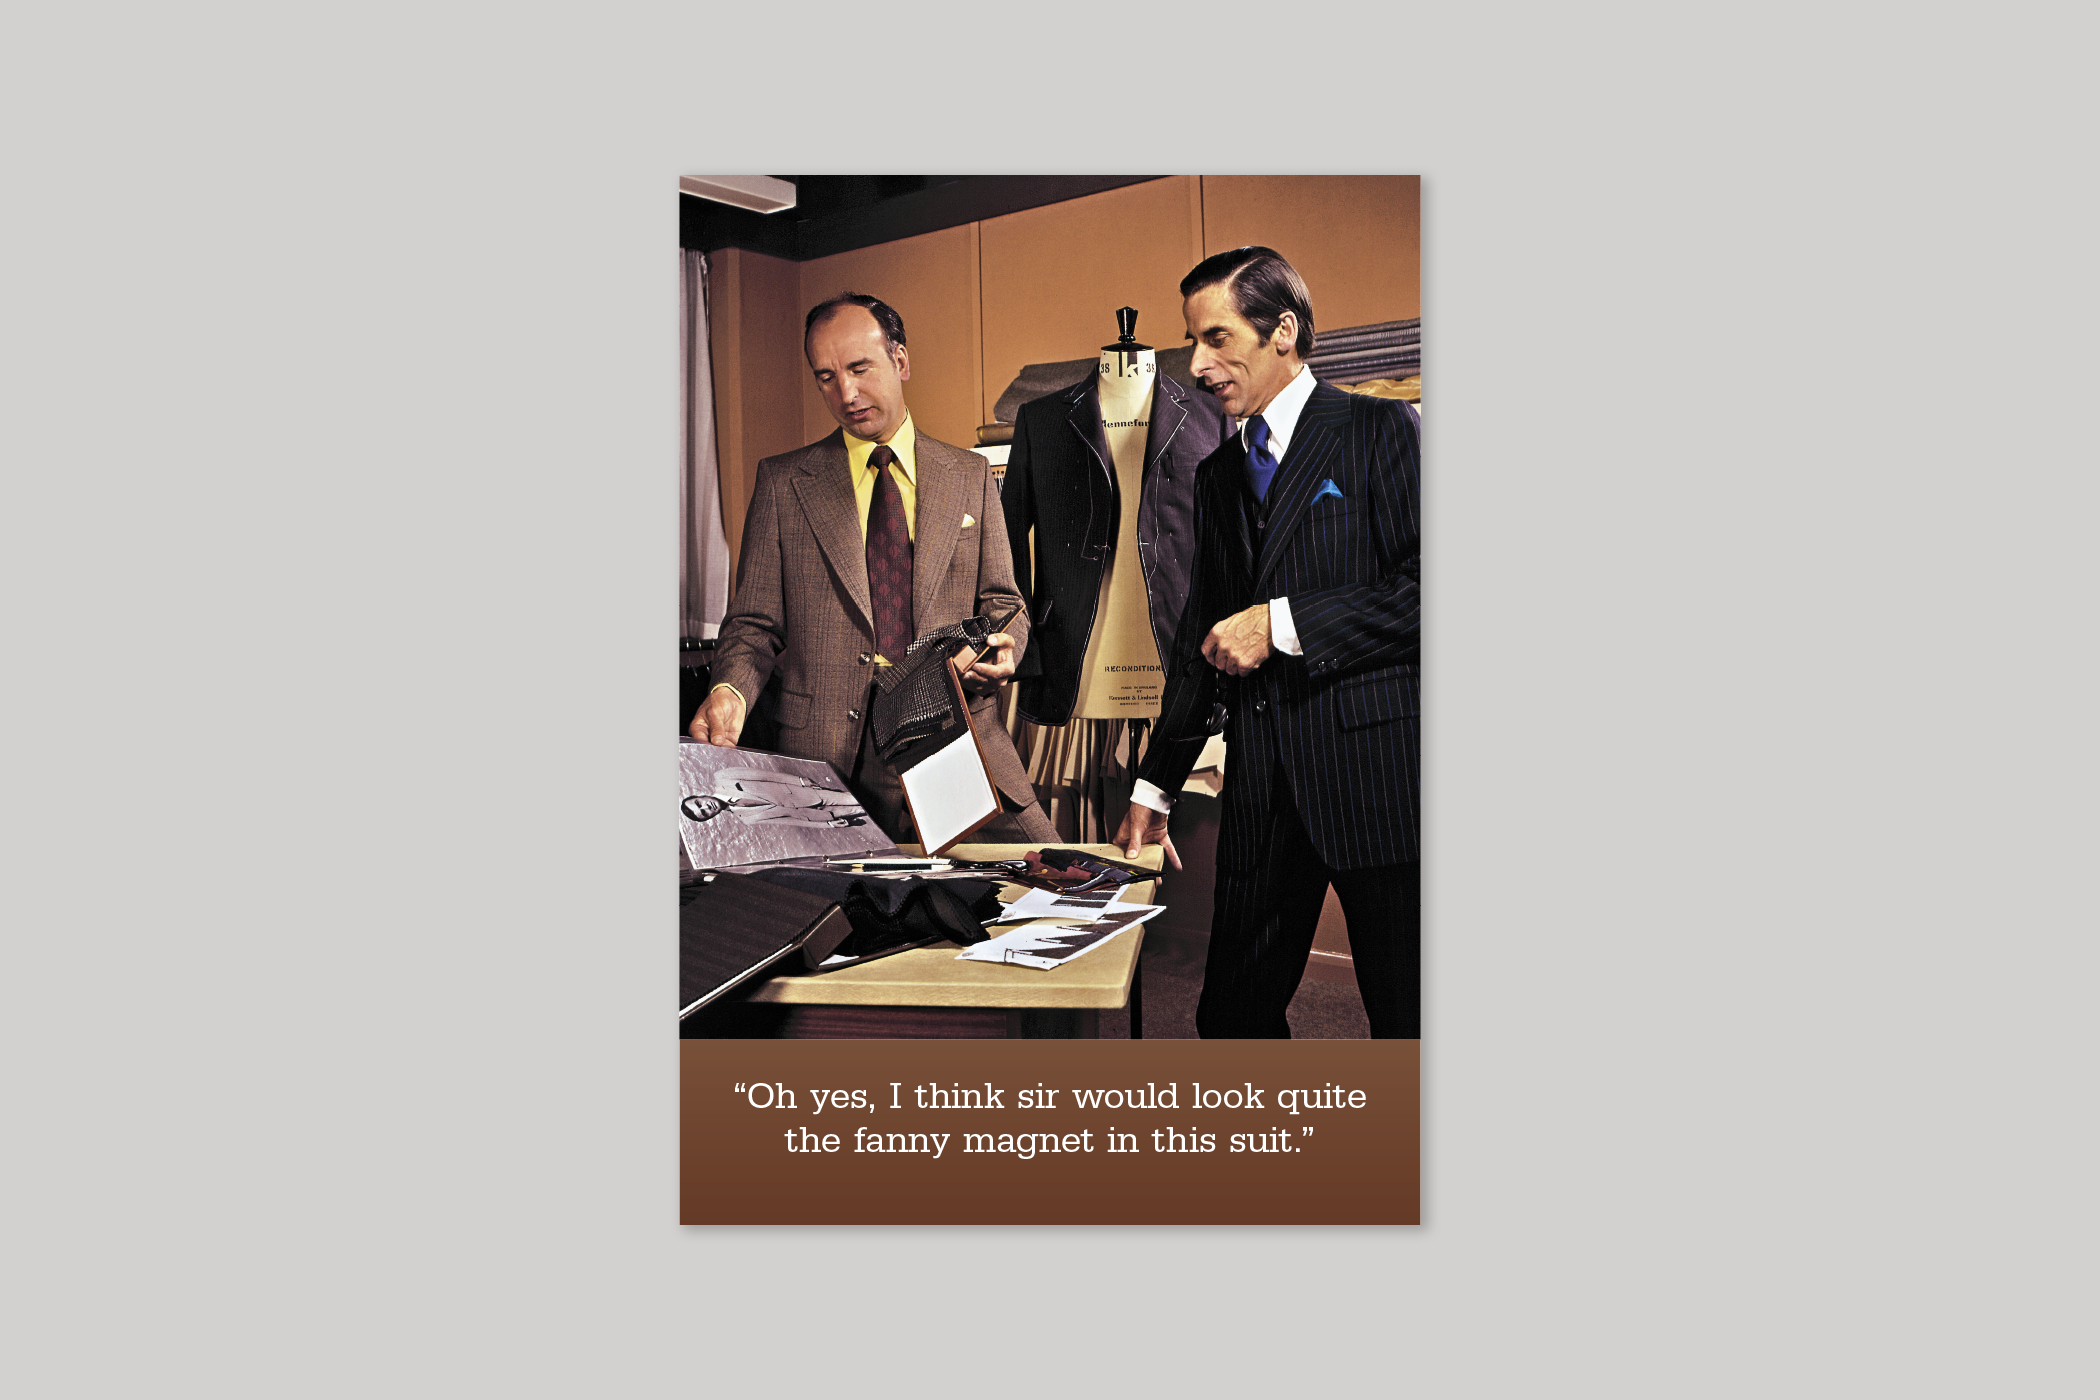 Suit You from Blush humour range of greeting cards by Icon.